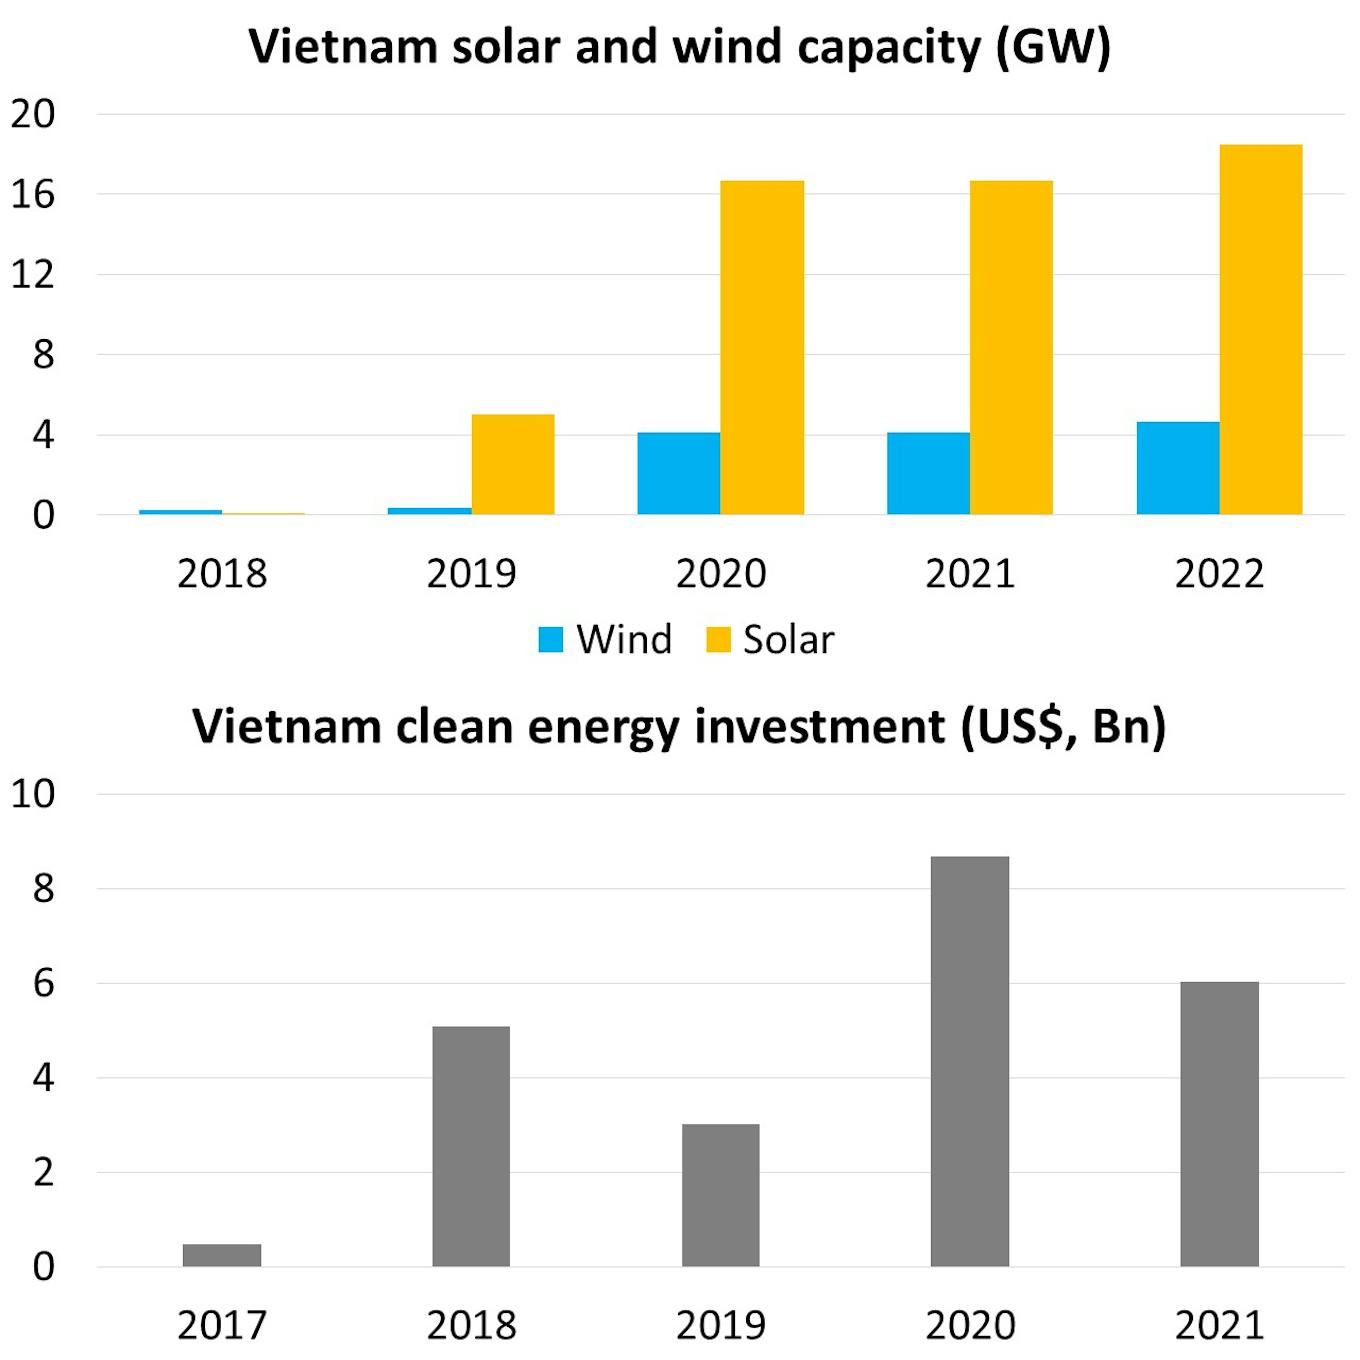 Vietnam RE capacity and investments